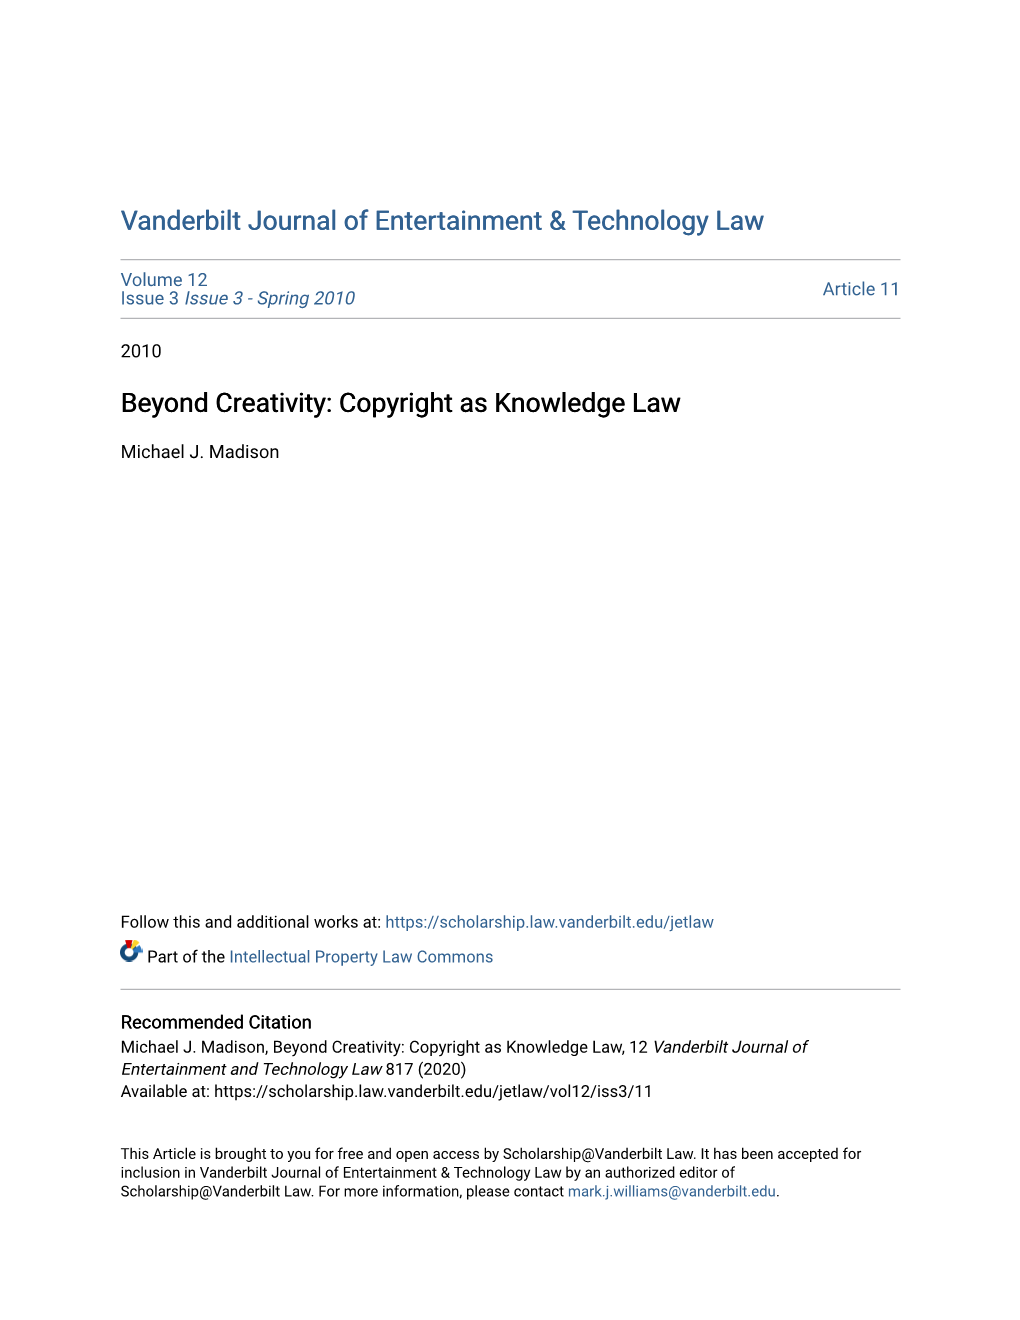 Beyond Creativity: Copyright As Knowledge Law